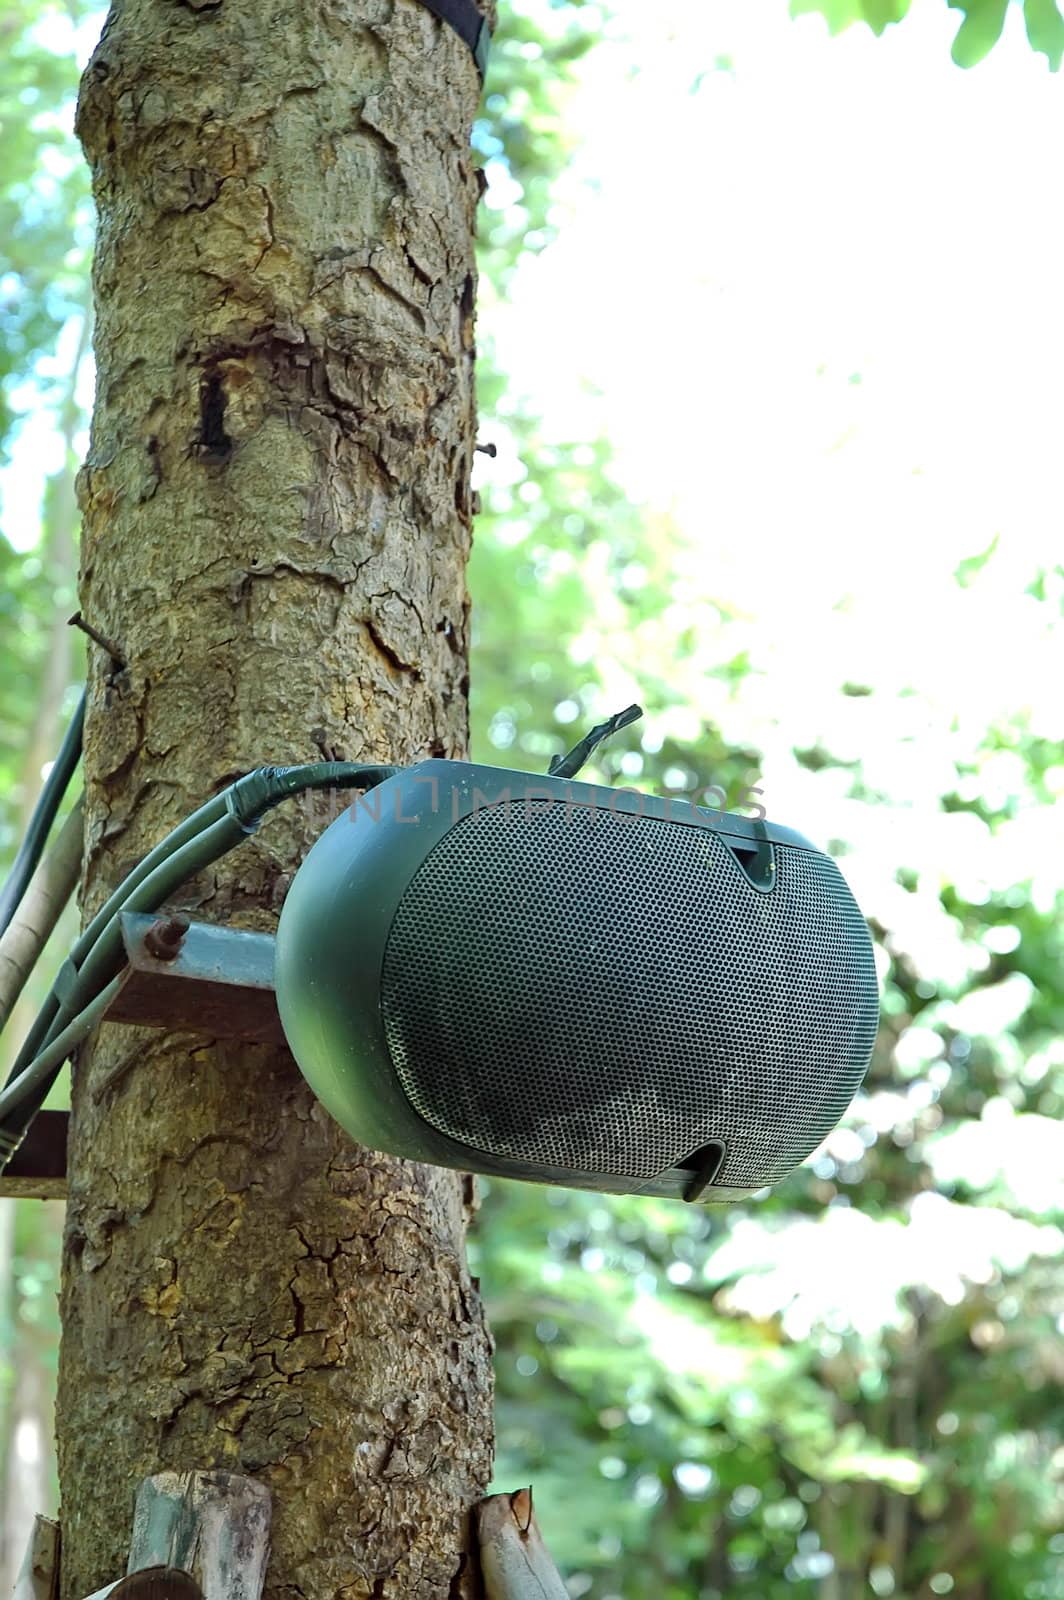 Speakers on the tree Using music in the park